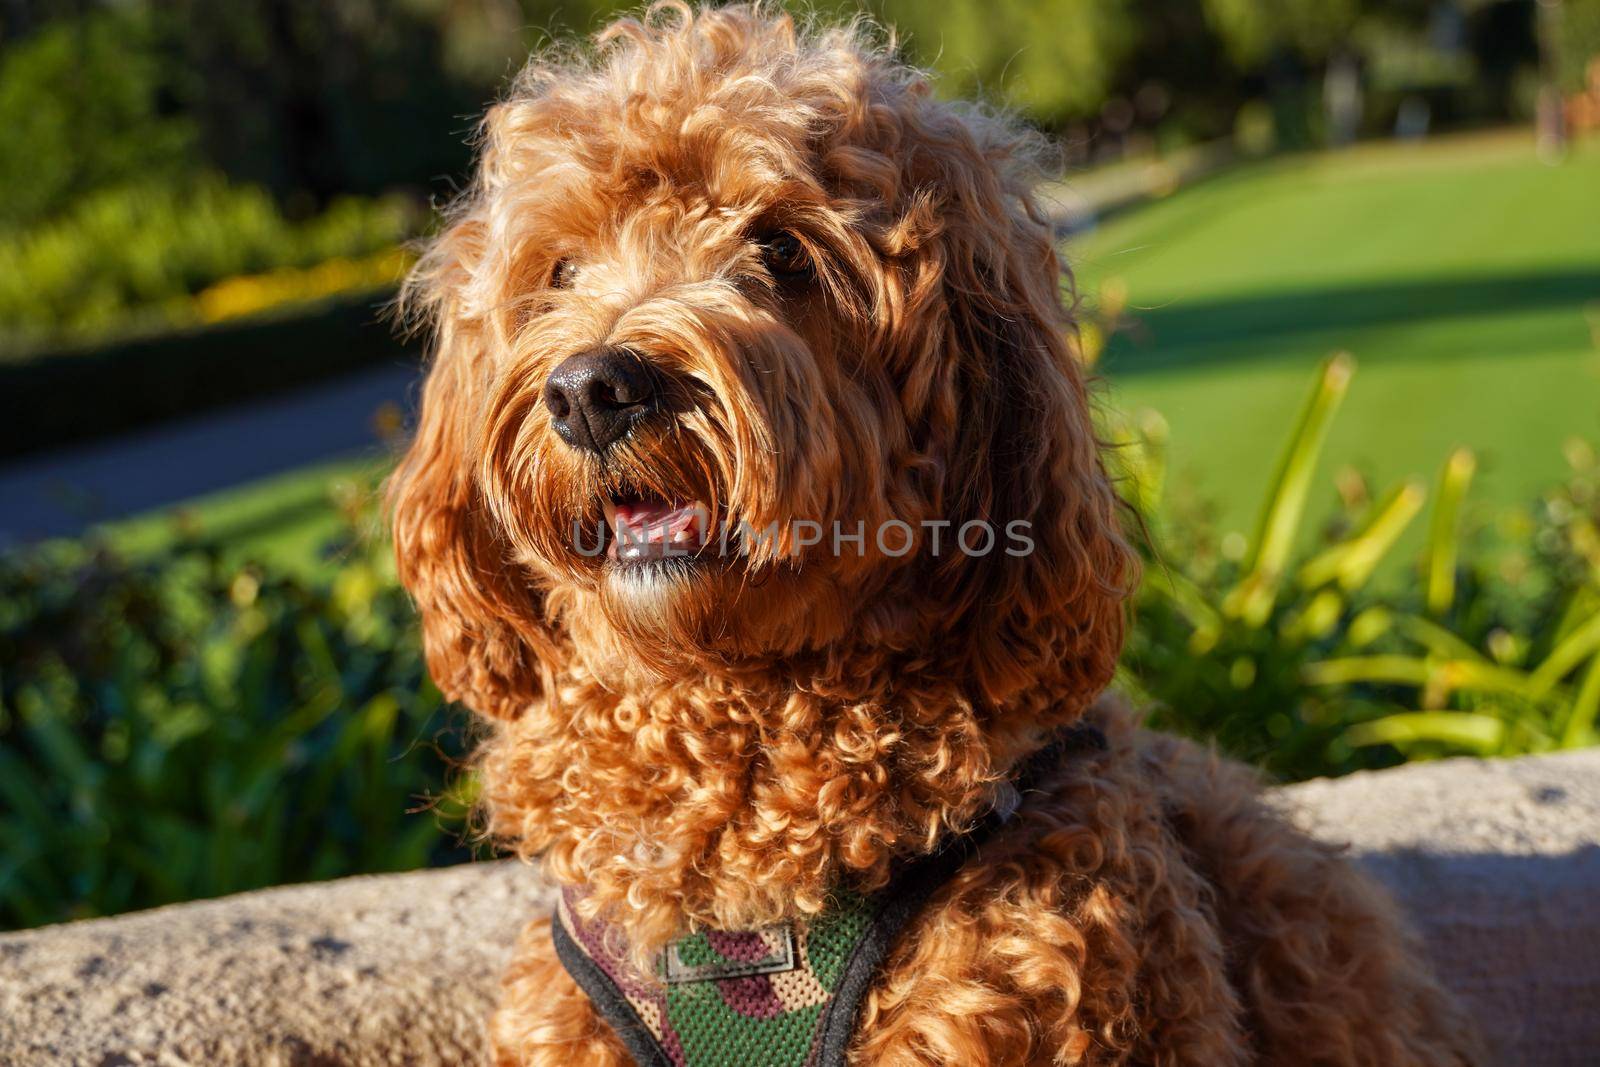 Cavapoo dog at the park, mixed -breed of Cavalier King Charles Spaniel and Poodle. by Bonandbon